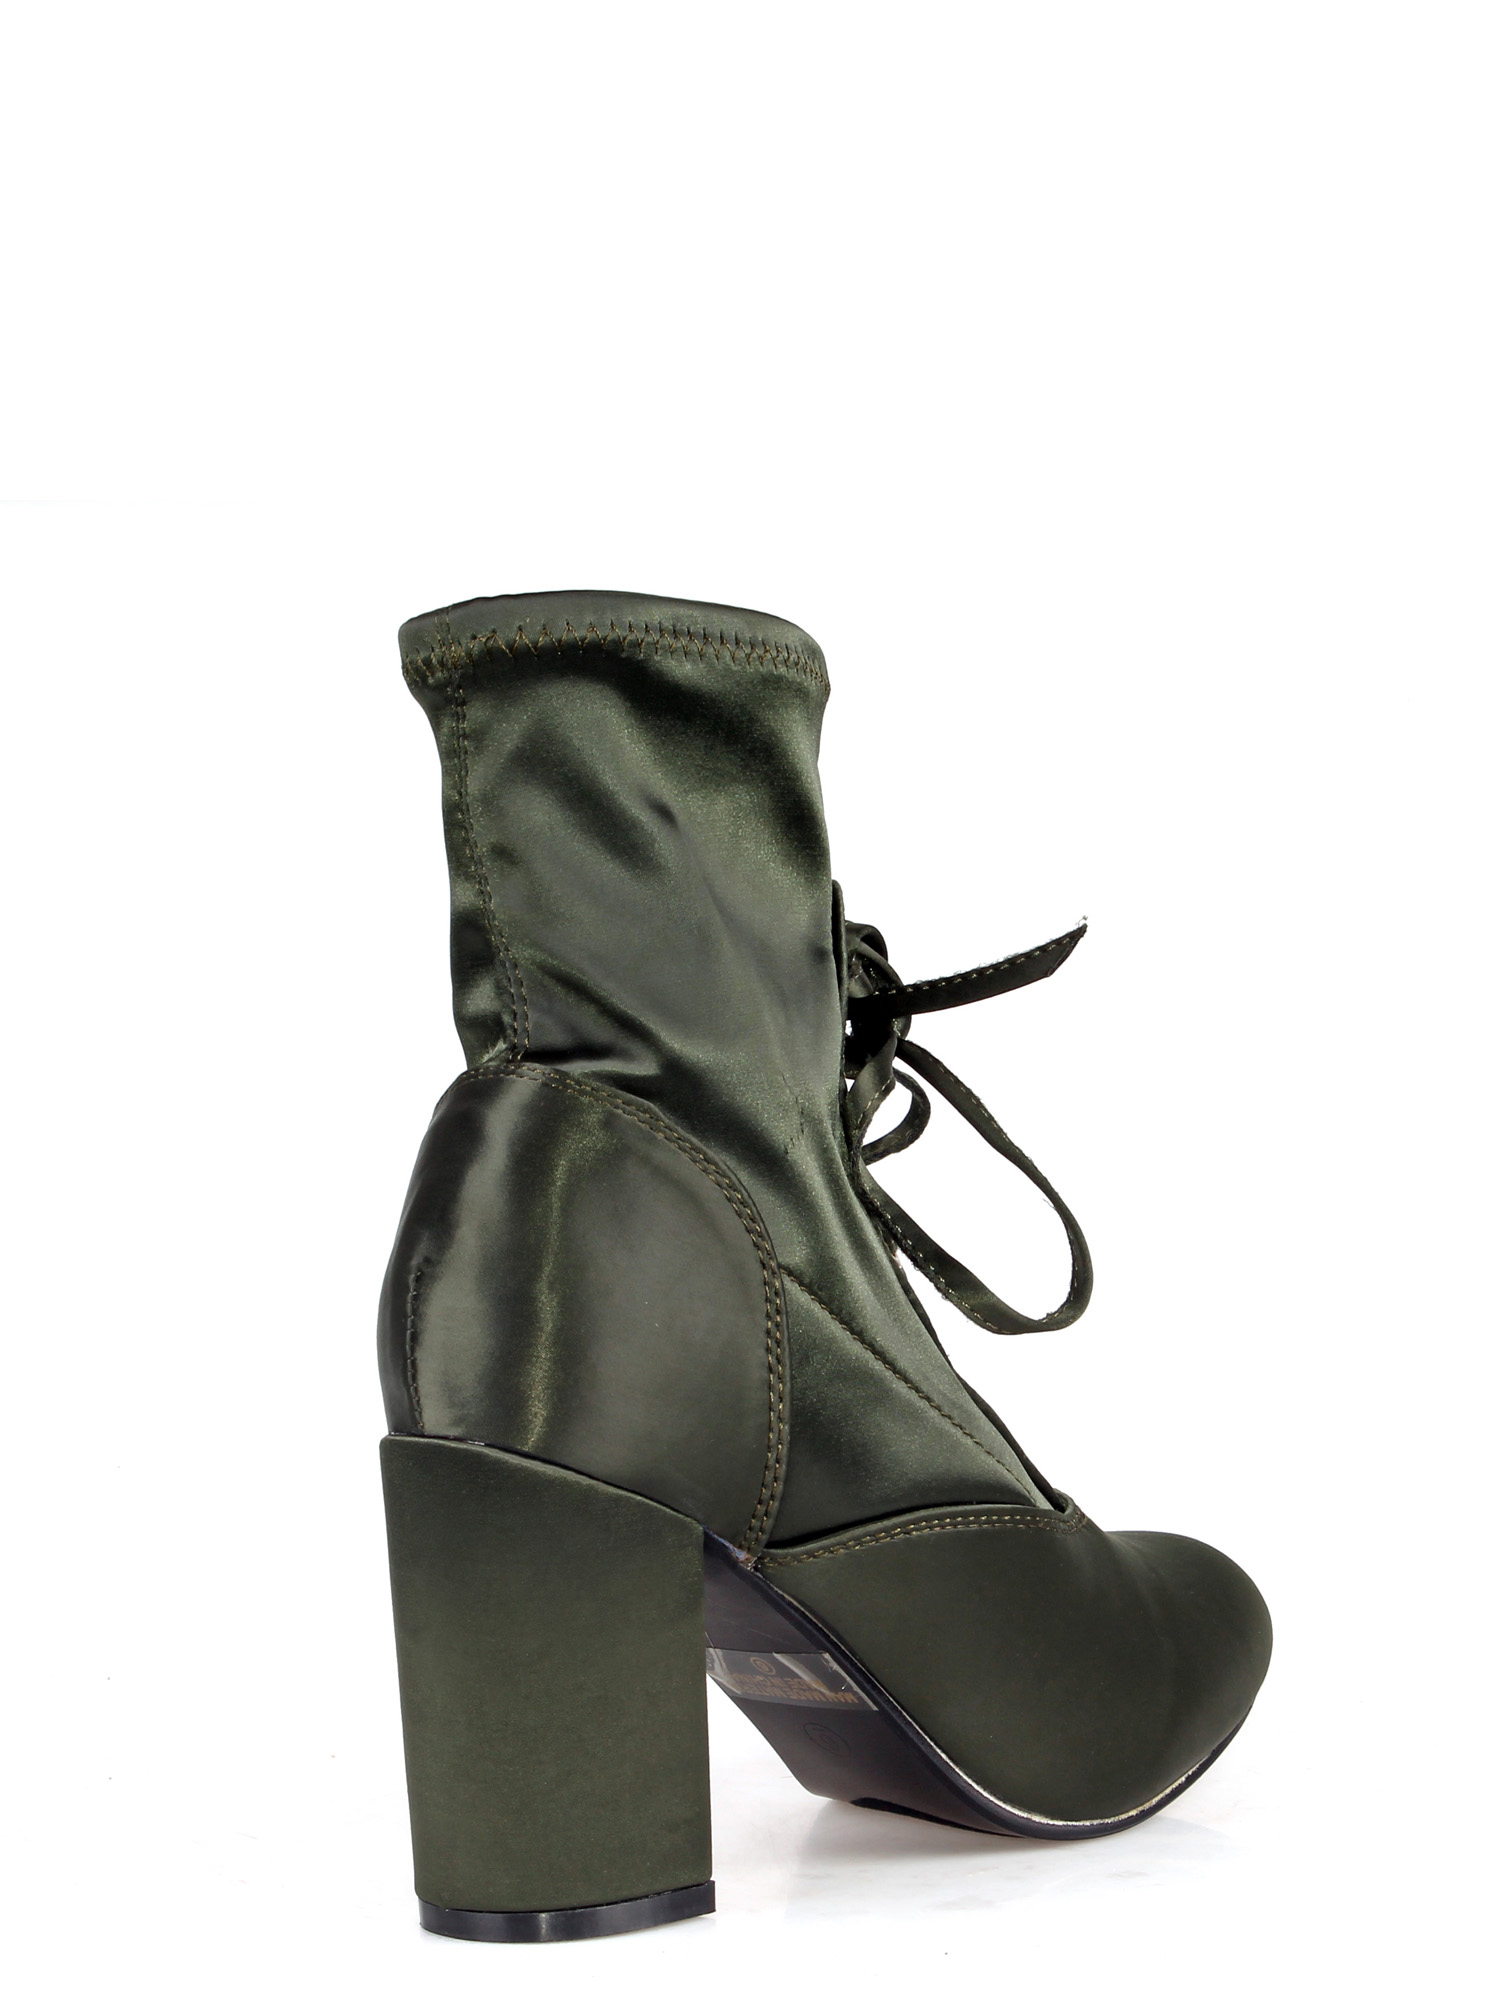 Nature Breeze Lace up Almond Toe Chunk Heel Women's Anke Boots in Olive - image 4 of 4